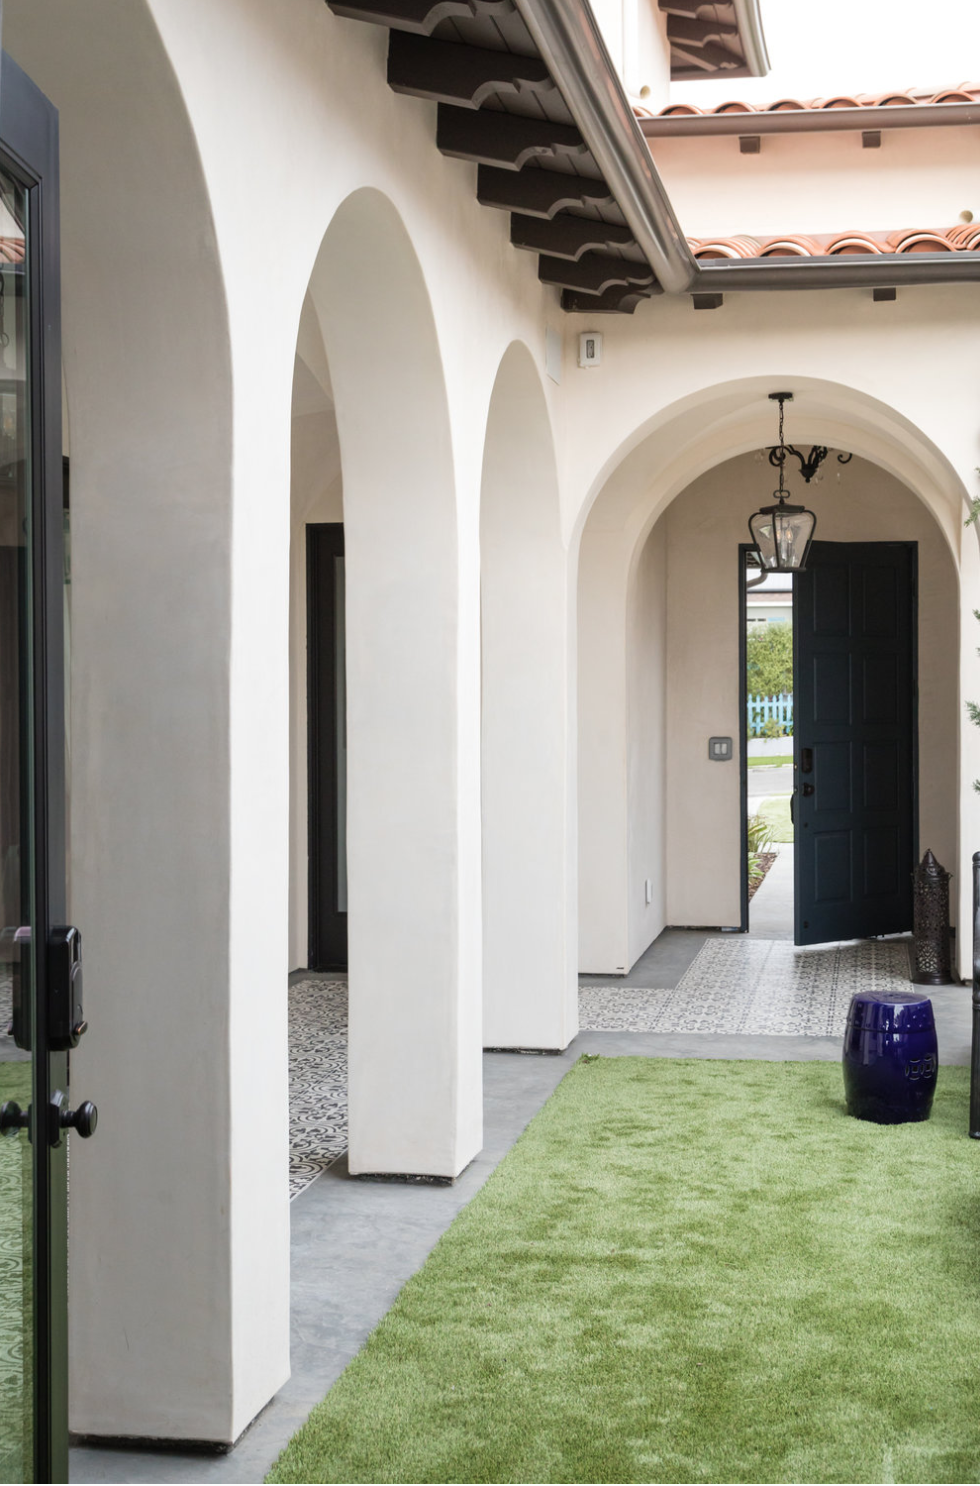 Cluny cement tiles in in-stock black and white encircle the courtyard of a Denton Developments project